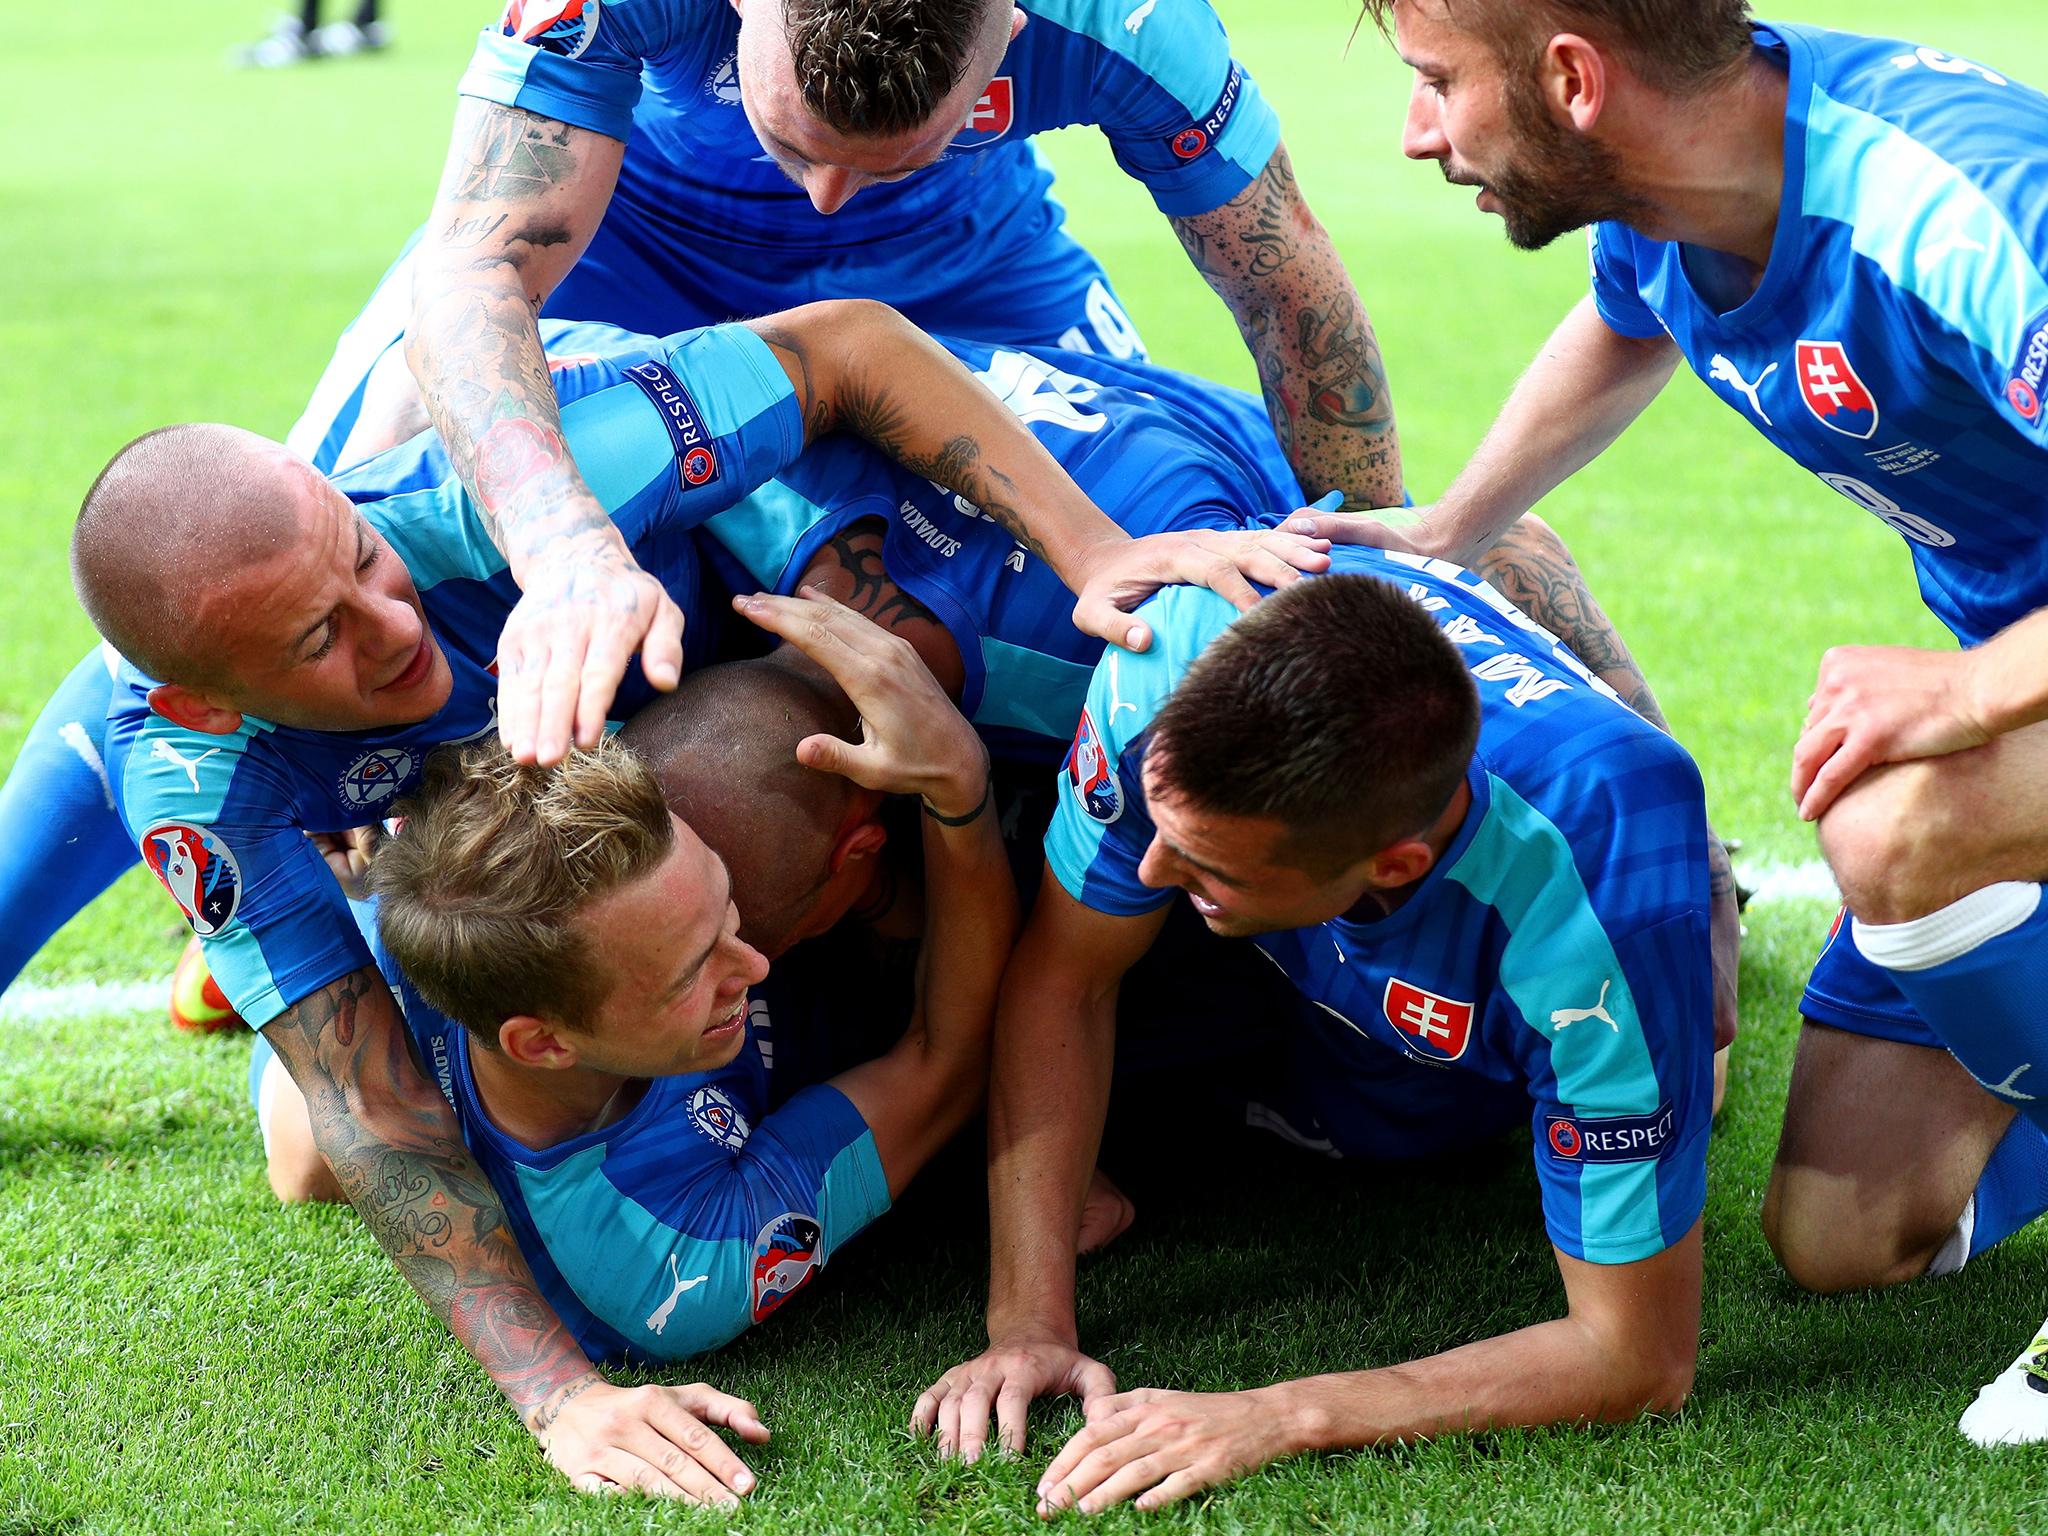 Duda was smothered by his team-mates after levelling for Slovakia